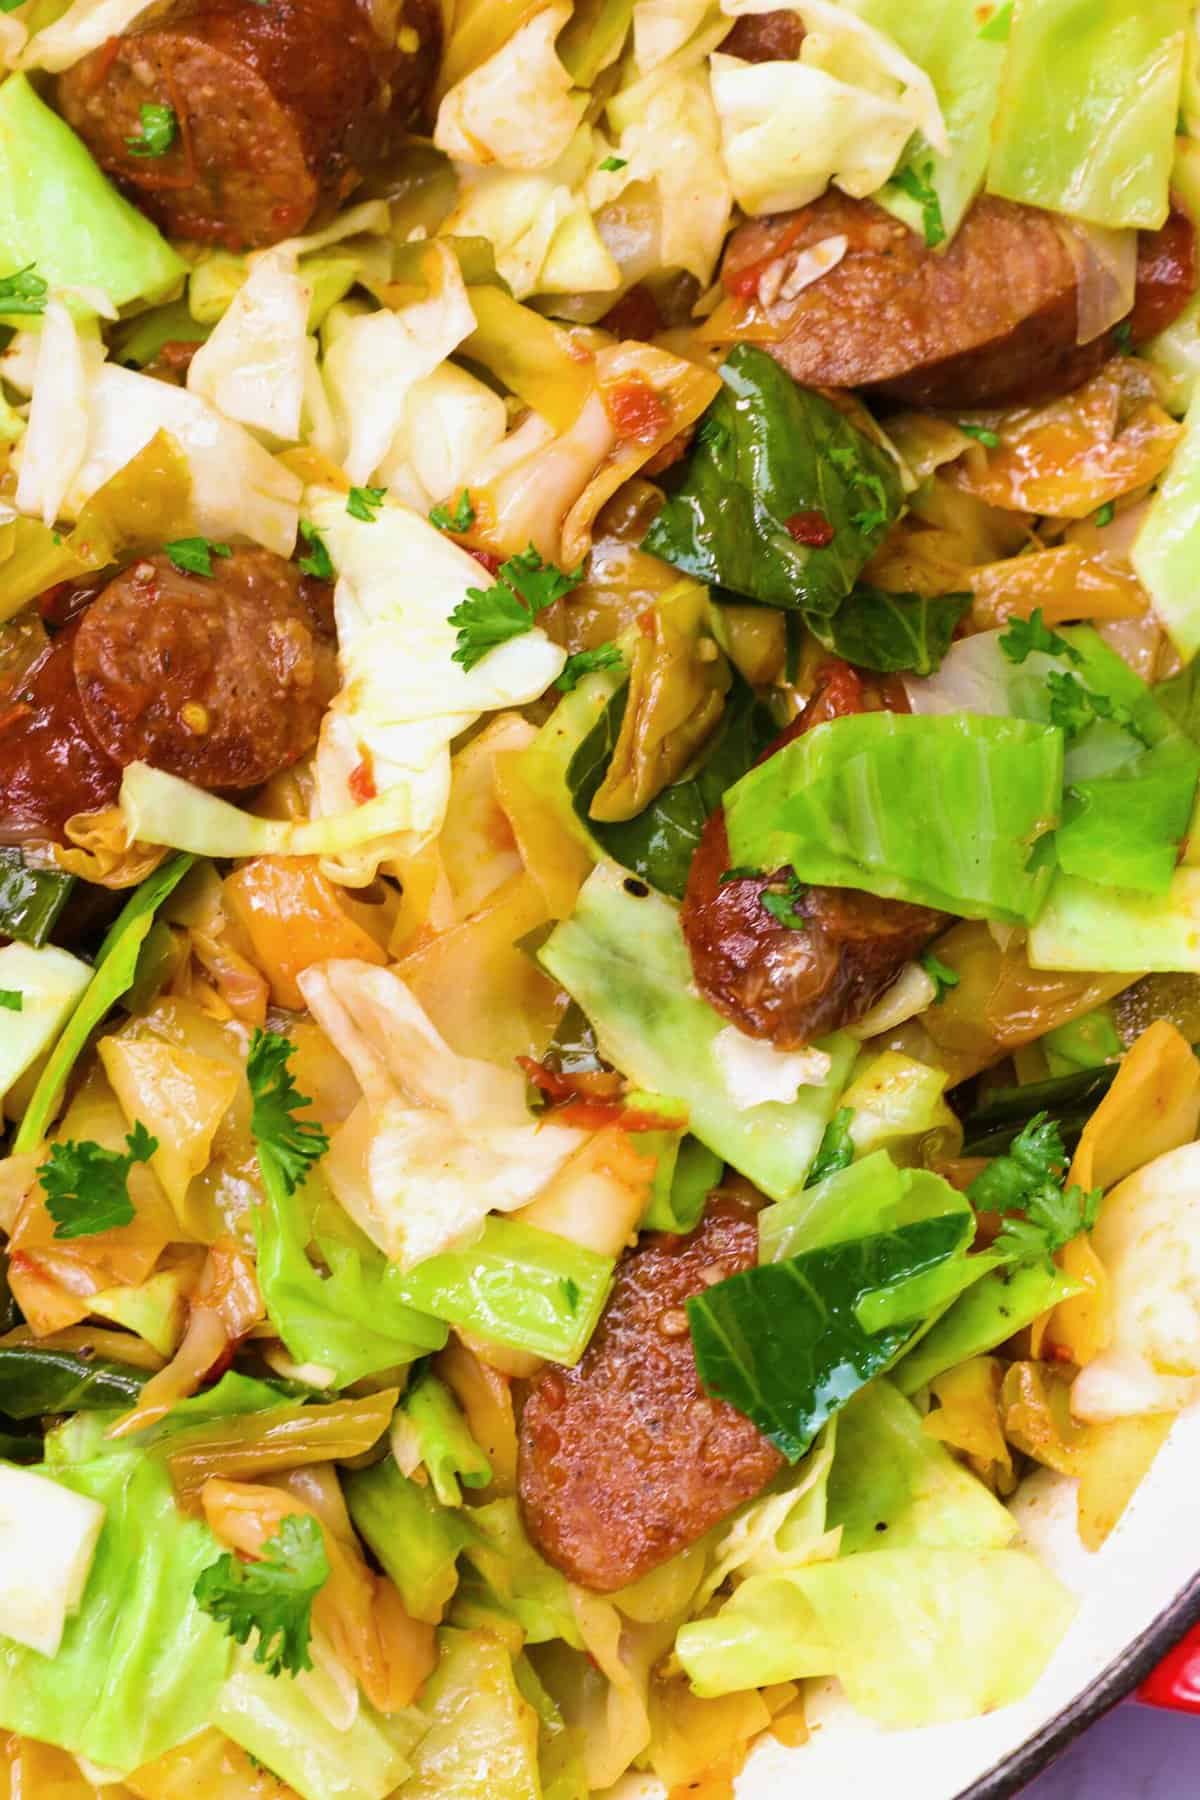 Authentic home-cooked cabbage and sausage